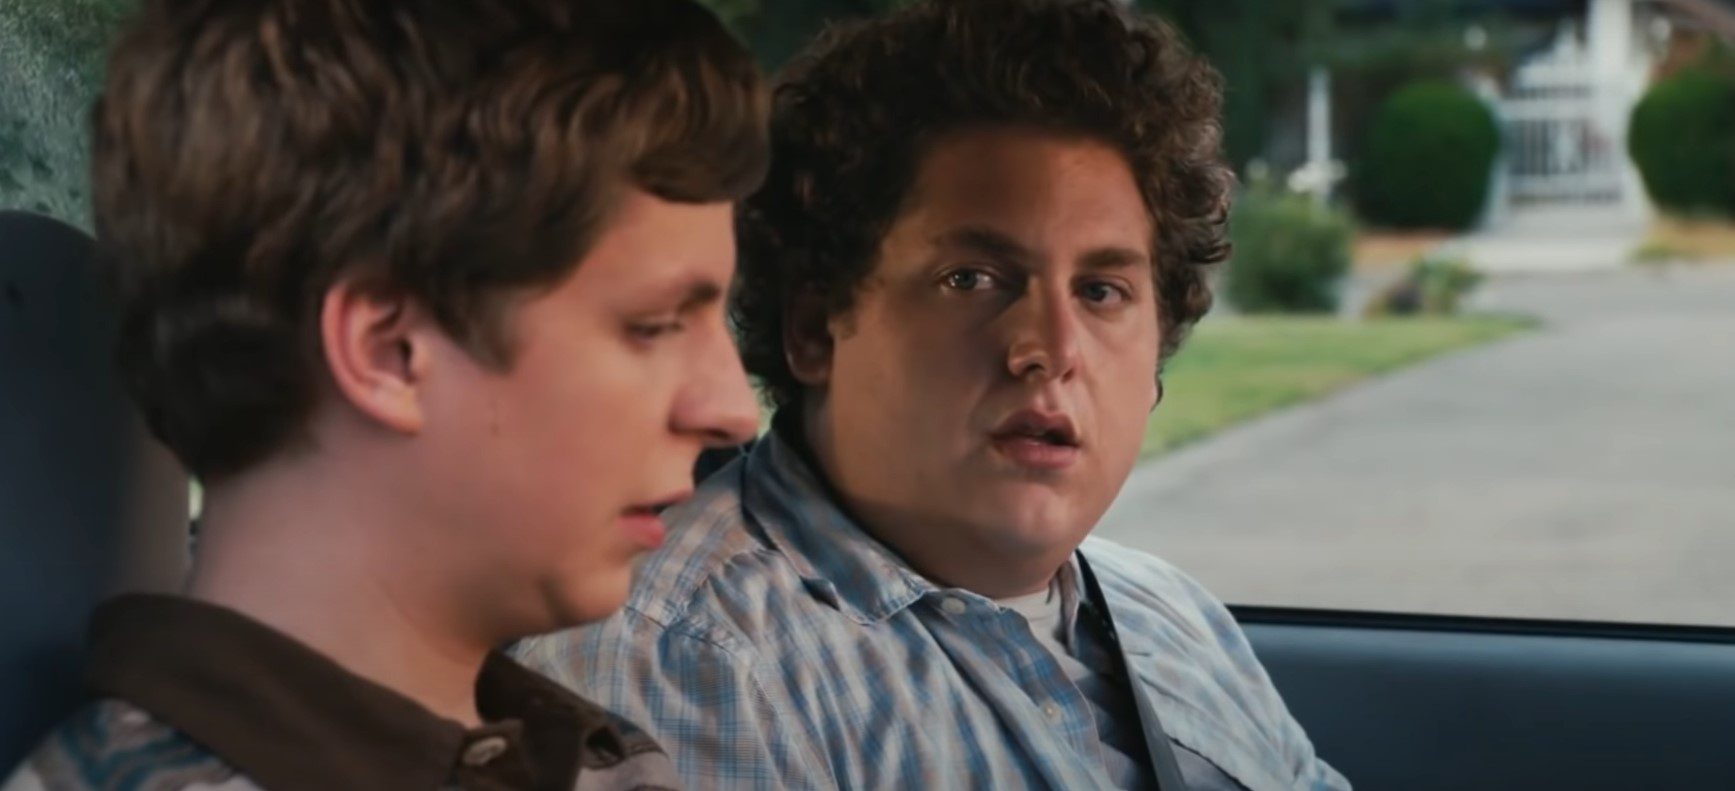 Where To Watch Superbad?